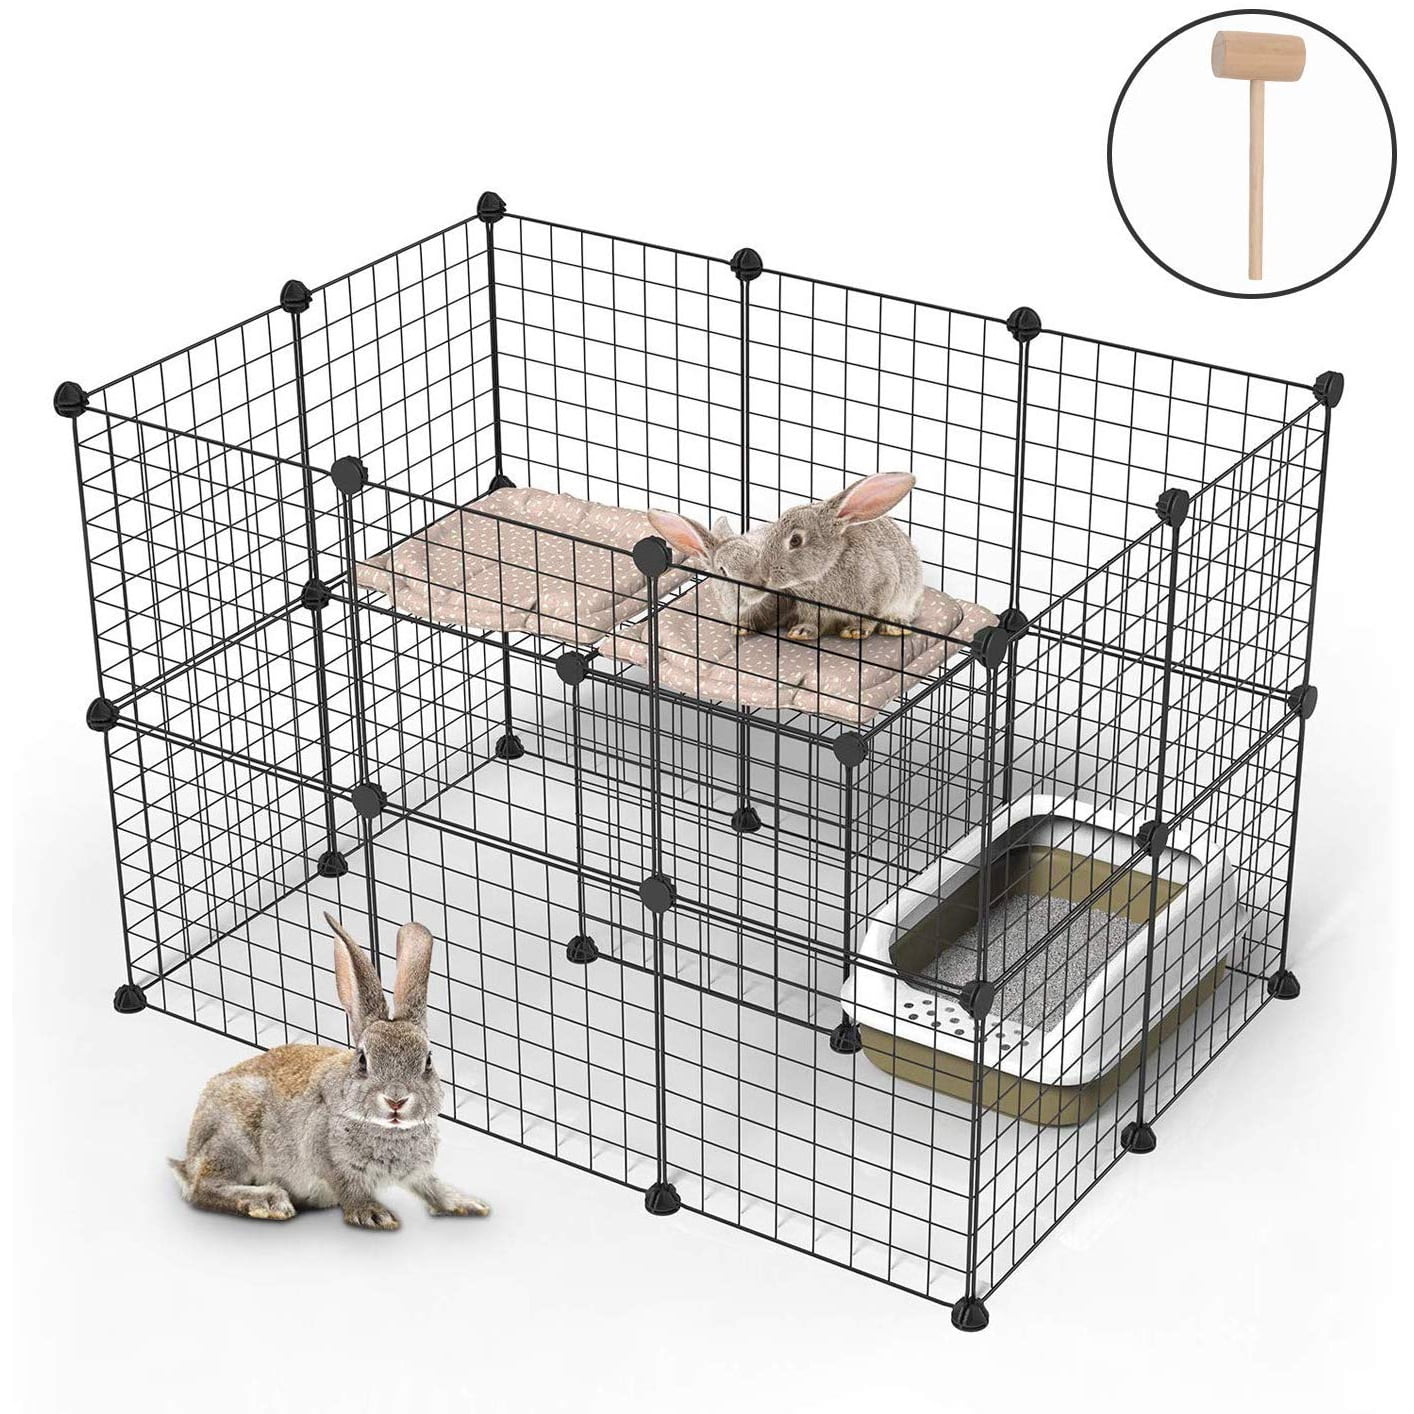 Heavy Duty Metal Pet Fence 8 Panels 40 inch Bellanny Dog Playpen Cat Puppy Exercise Pen Portable & Foldable Outdoor & Indoor DIY Shapes 